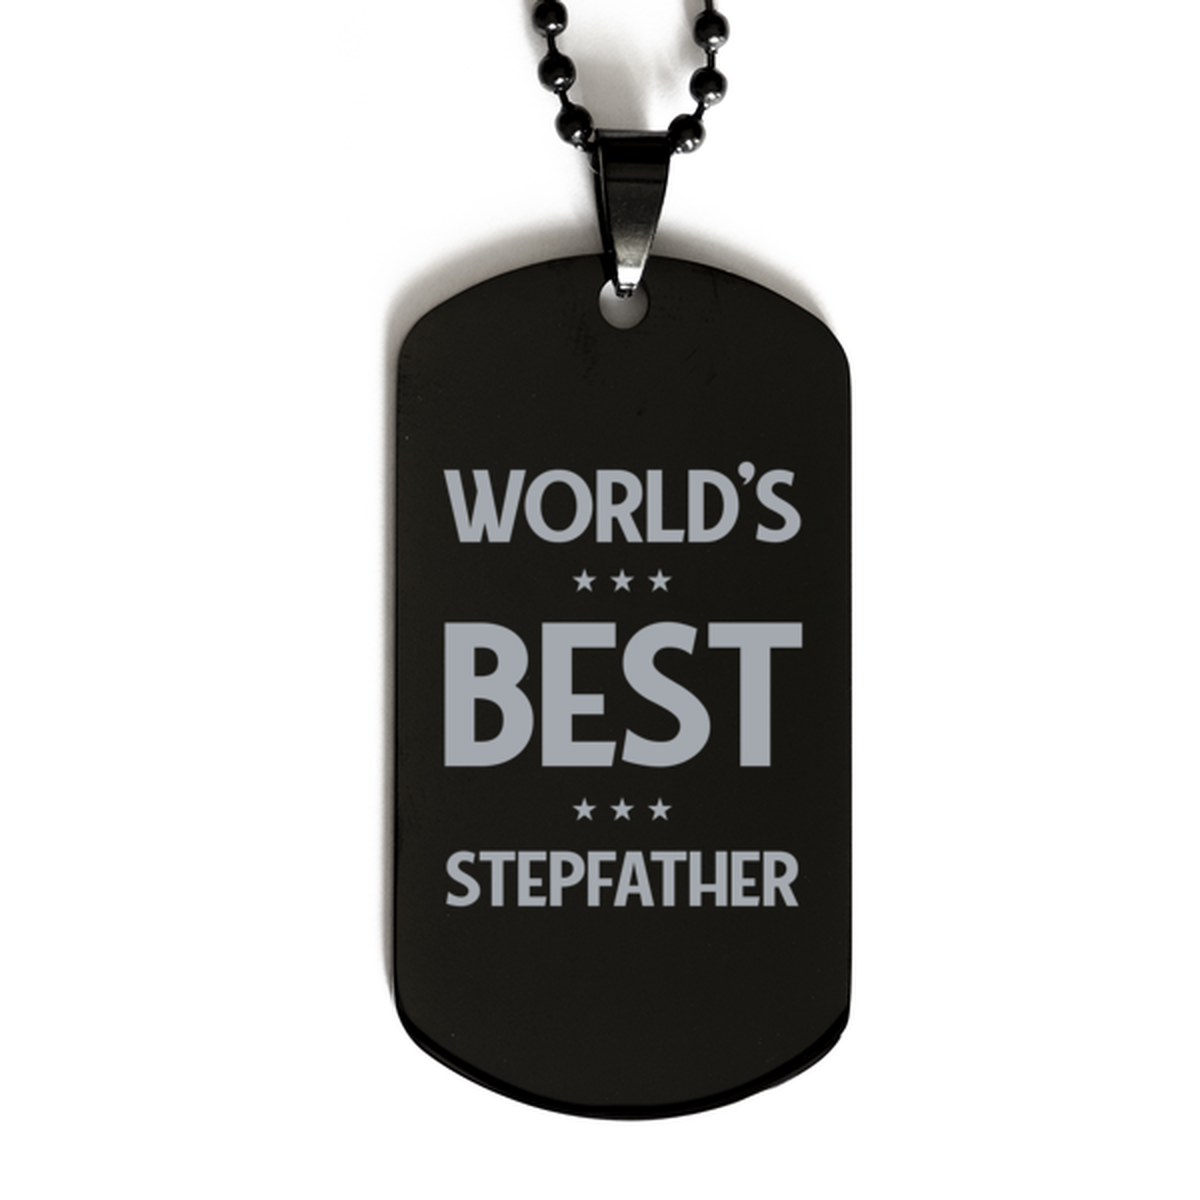 Worlds Best Stepfather Gifts, Funny Black Engraved Dog Tag For Stepfather, Birthday Presents For Men